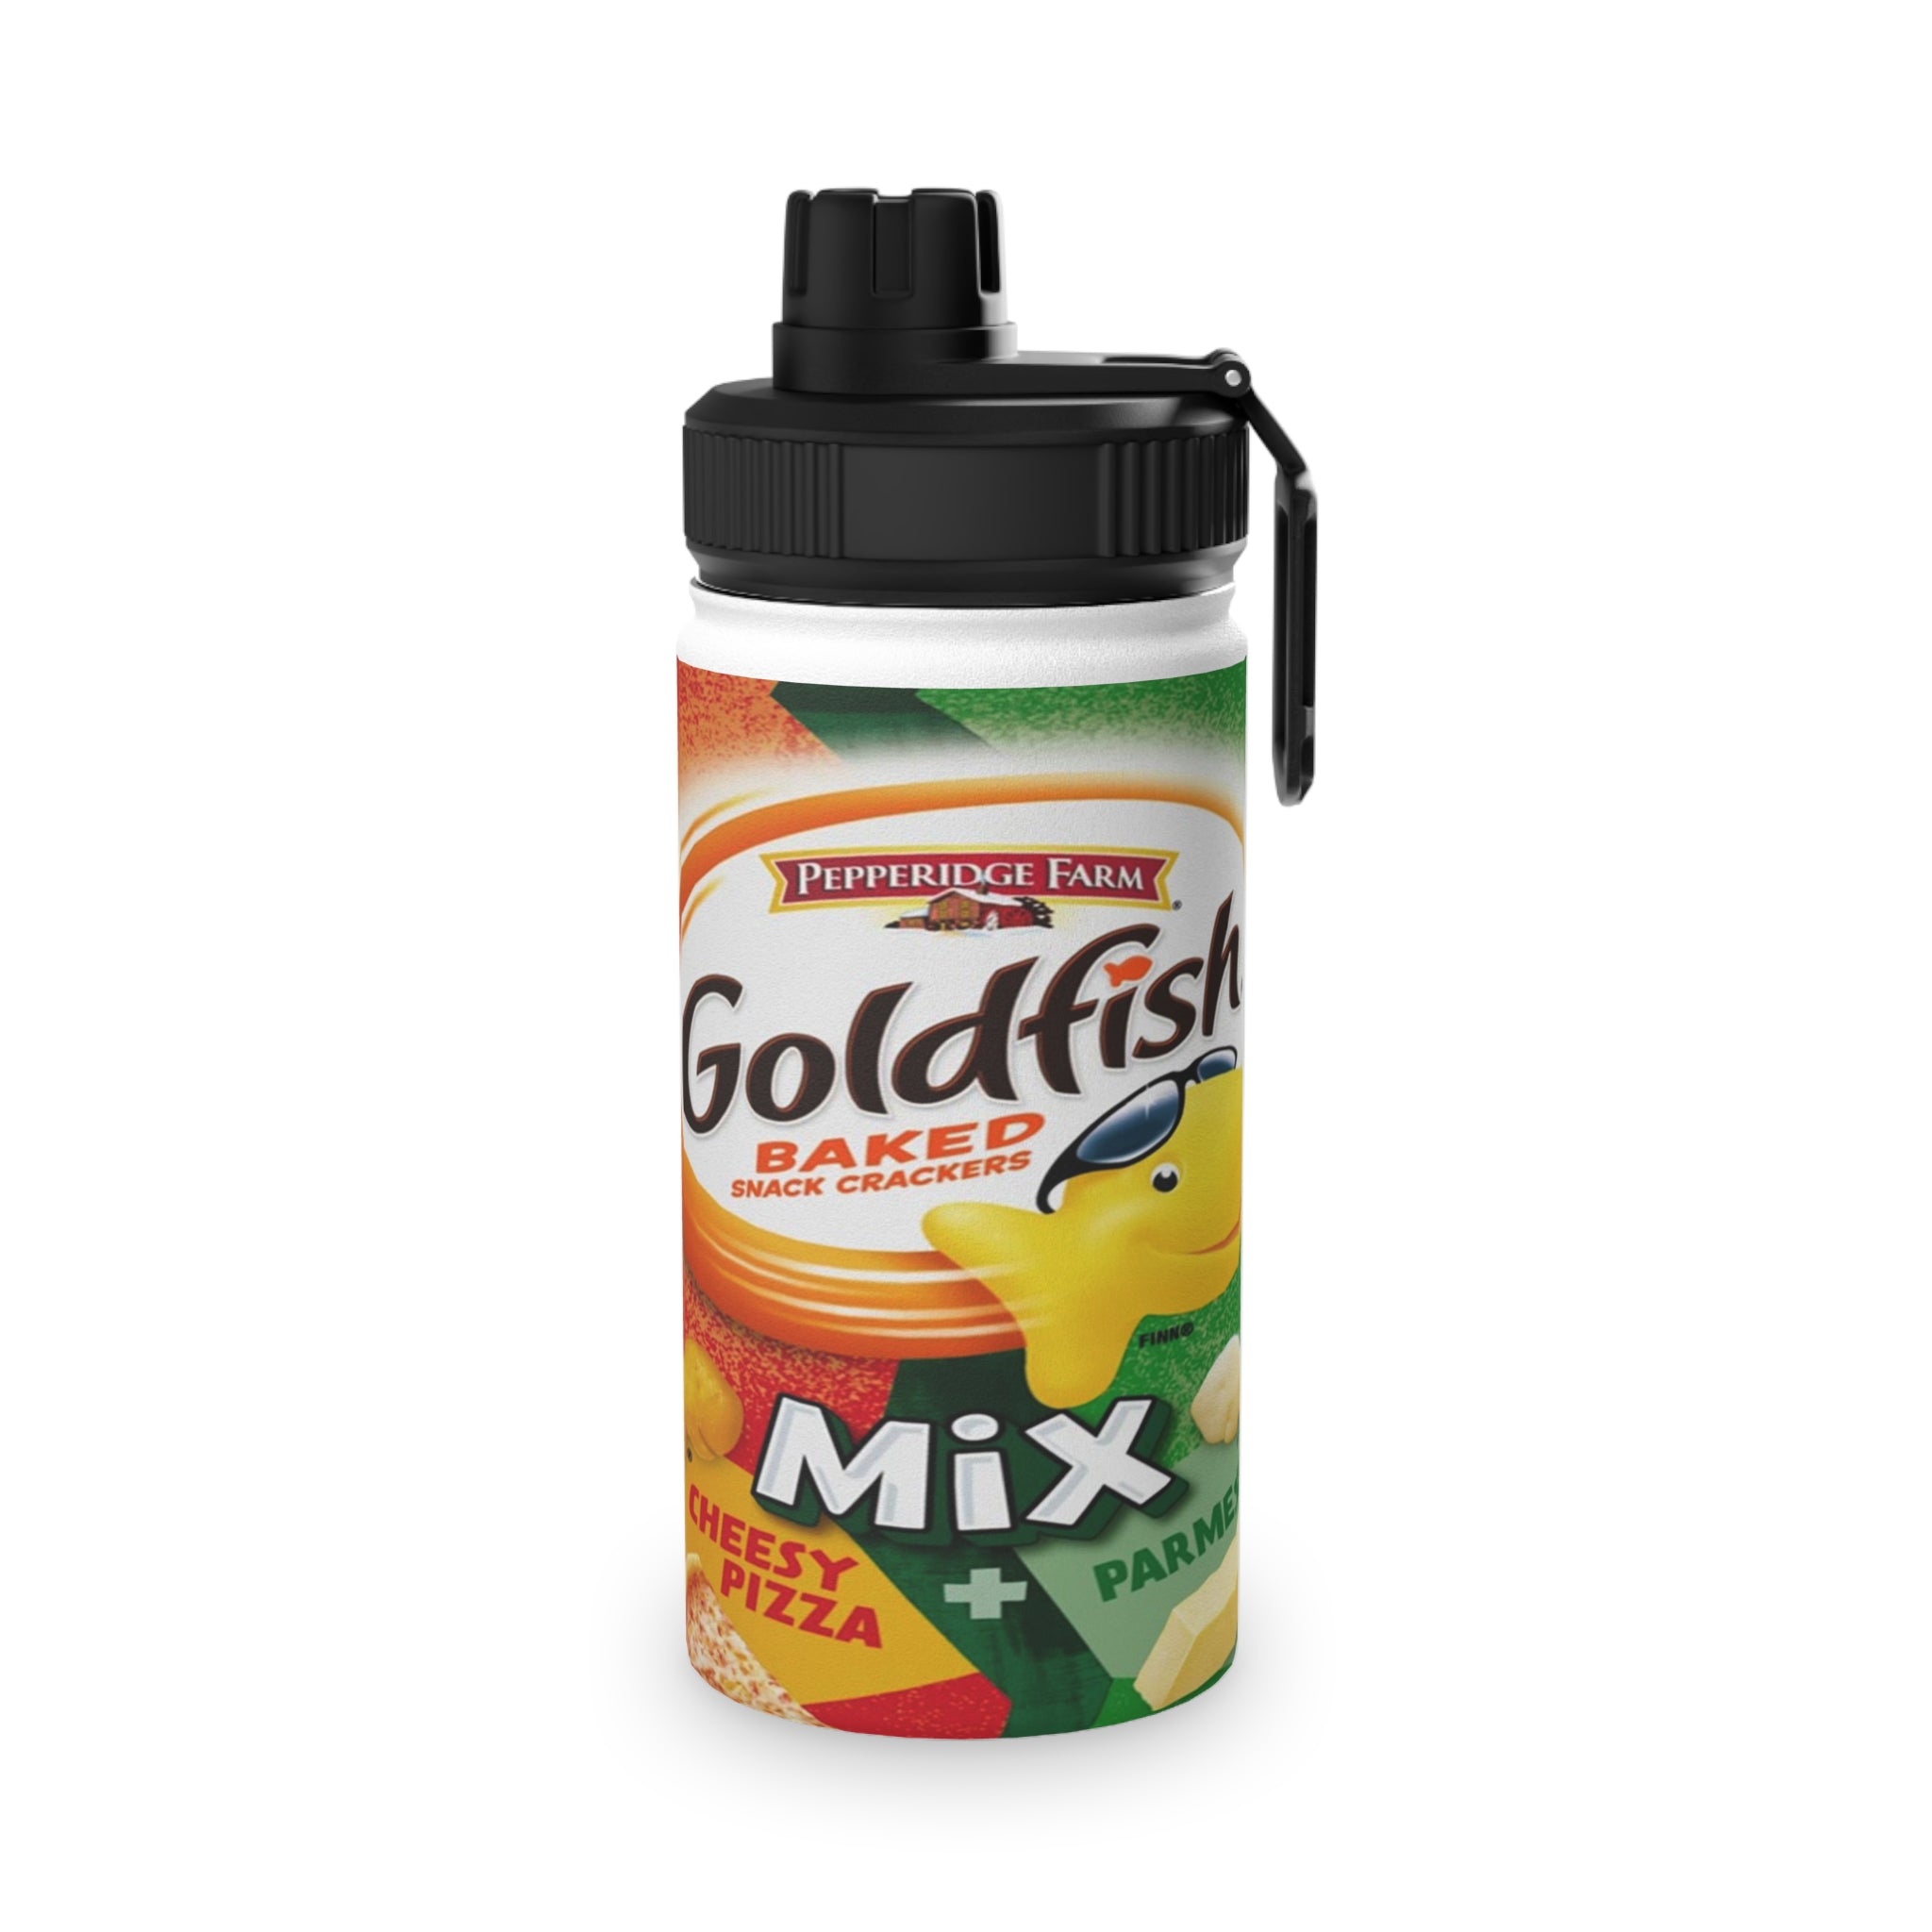 Pepperidge Farm Goldfish Mix Cheesy Pizza + Parmesan Crackers Stainless Steel Water Bottle, Sports Lid